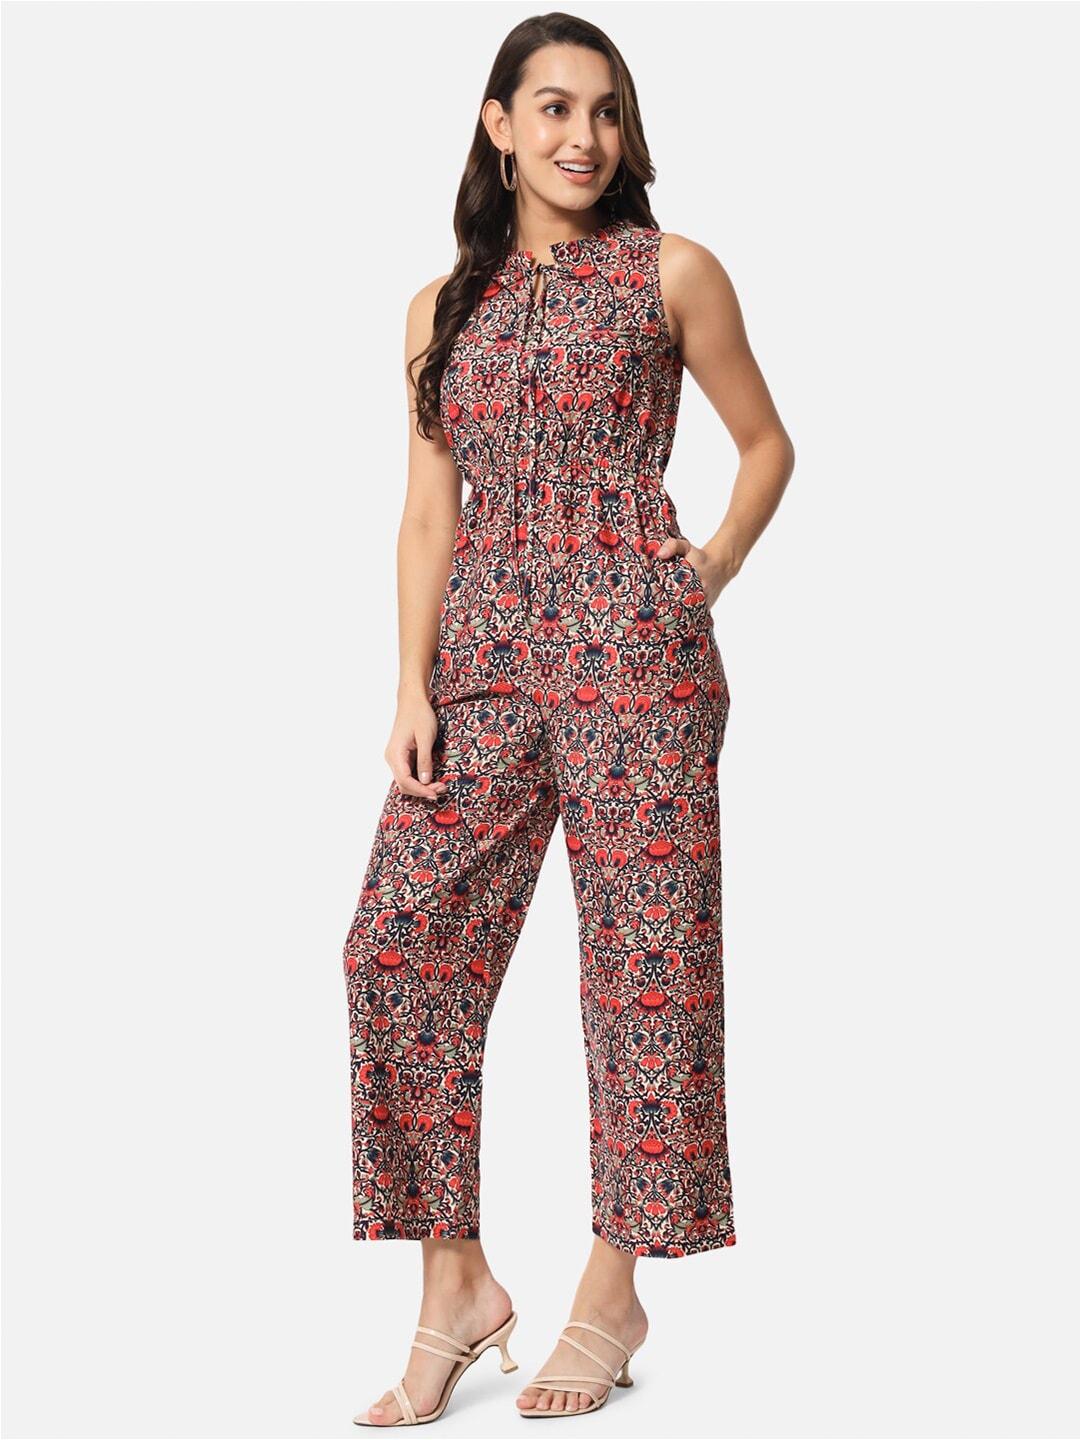 baesd floral printed tie-up neck ruffled basic jumpsuit